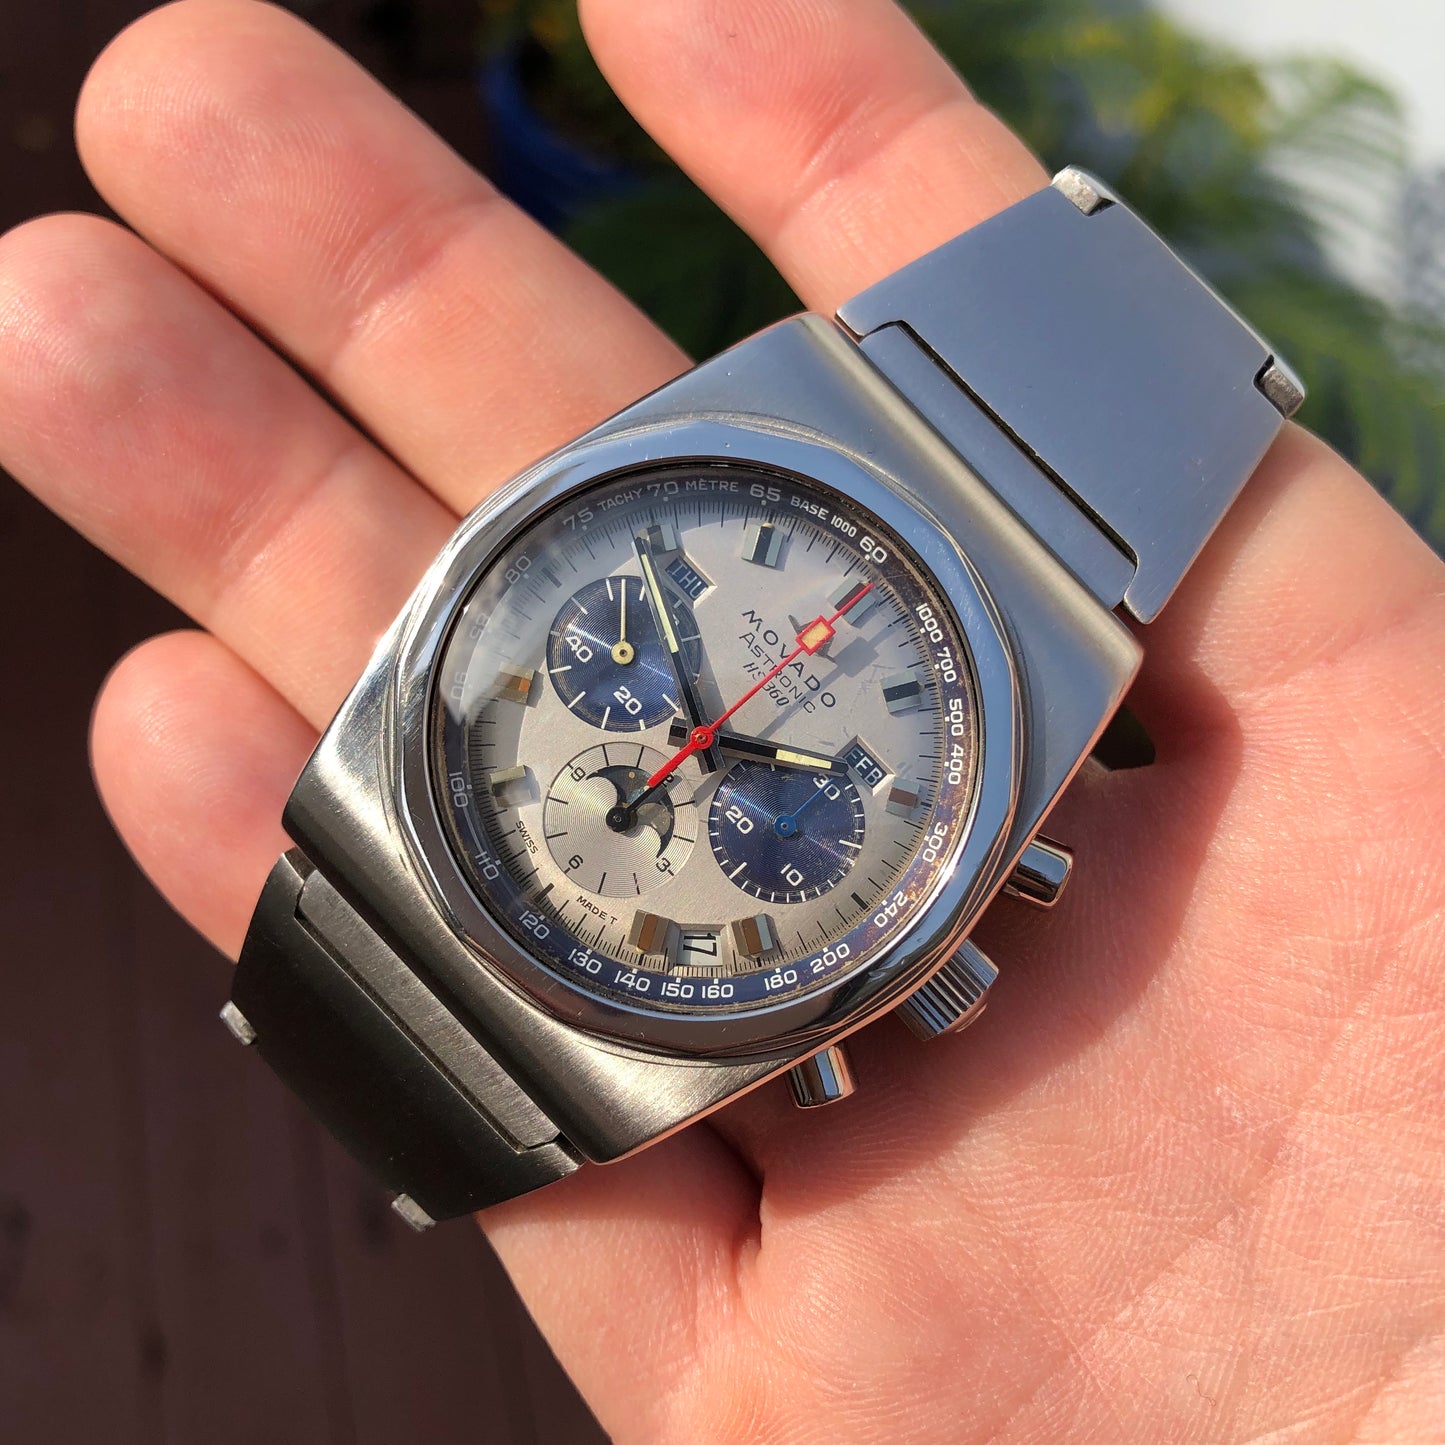 Vintage Movado Astronic HS360 Super Sub Sea El Primero Chronograph Stainless Steel Wristwatch - Hashtag Watch Company